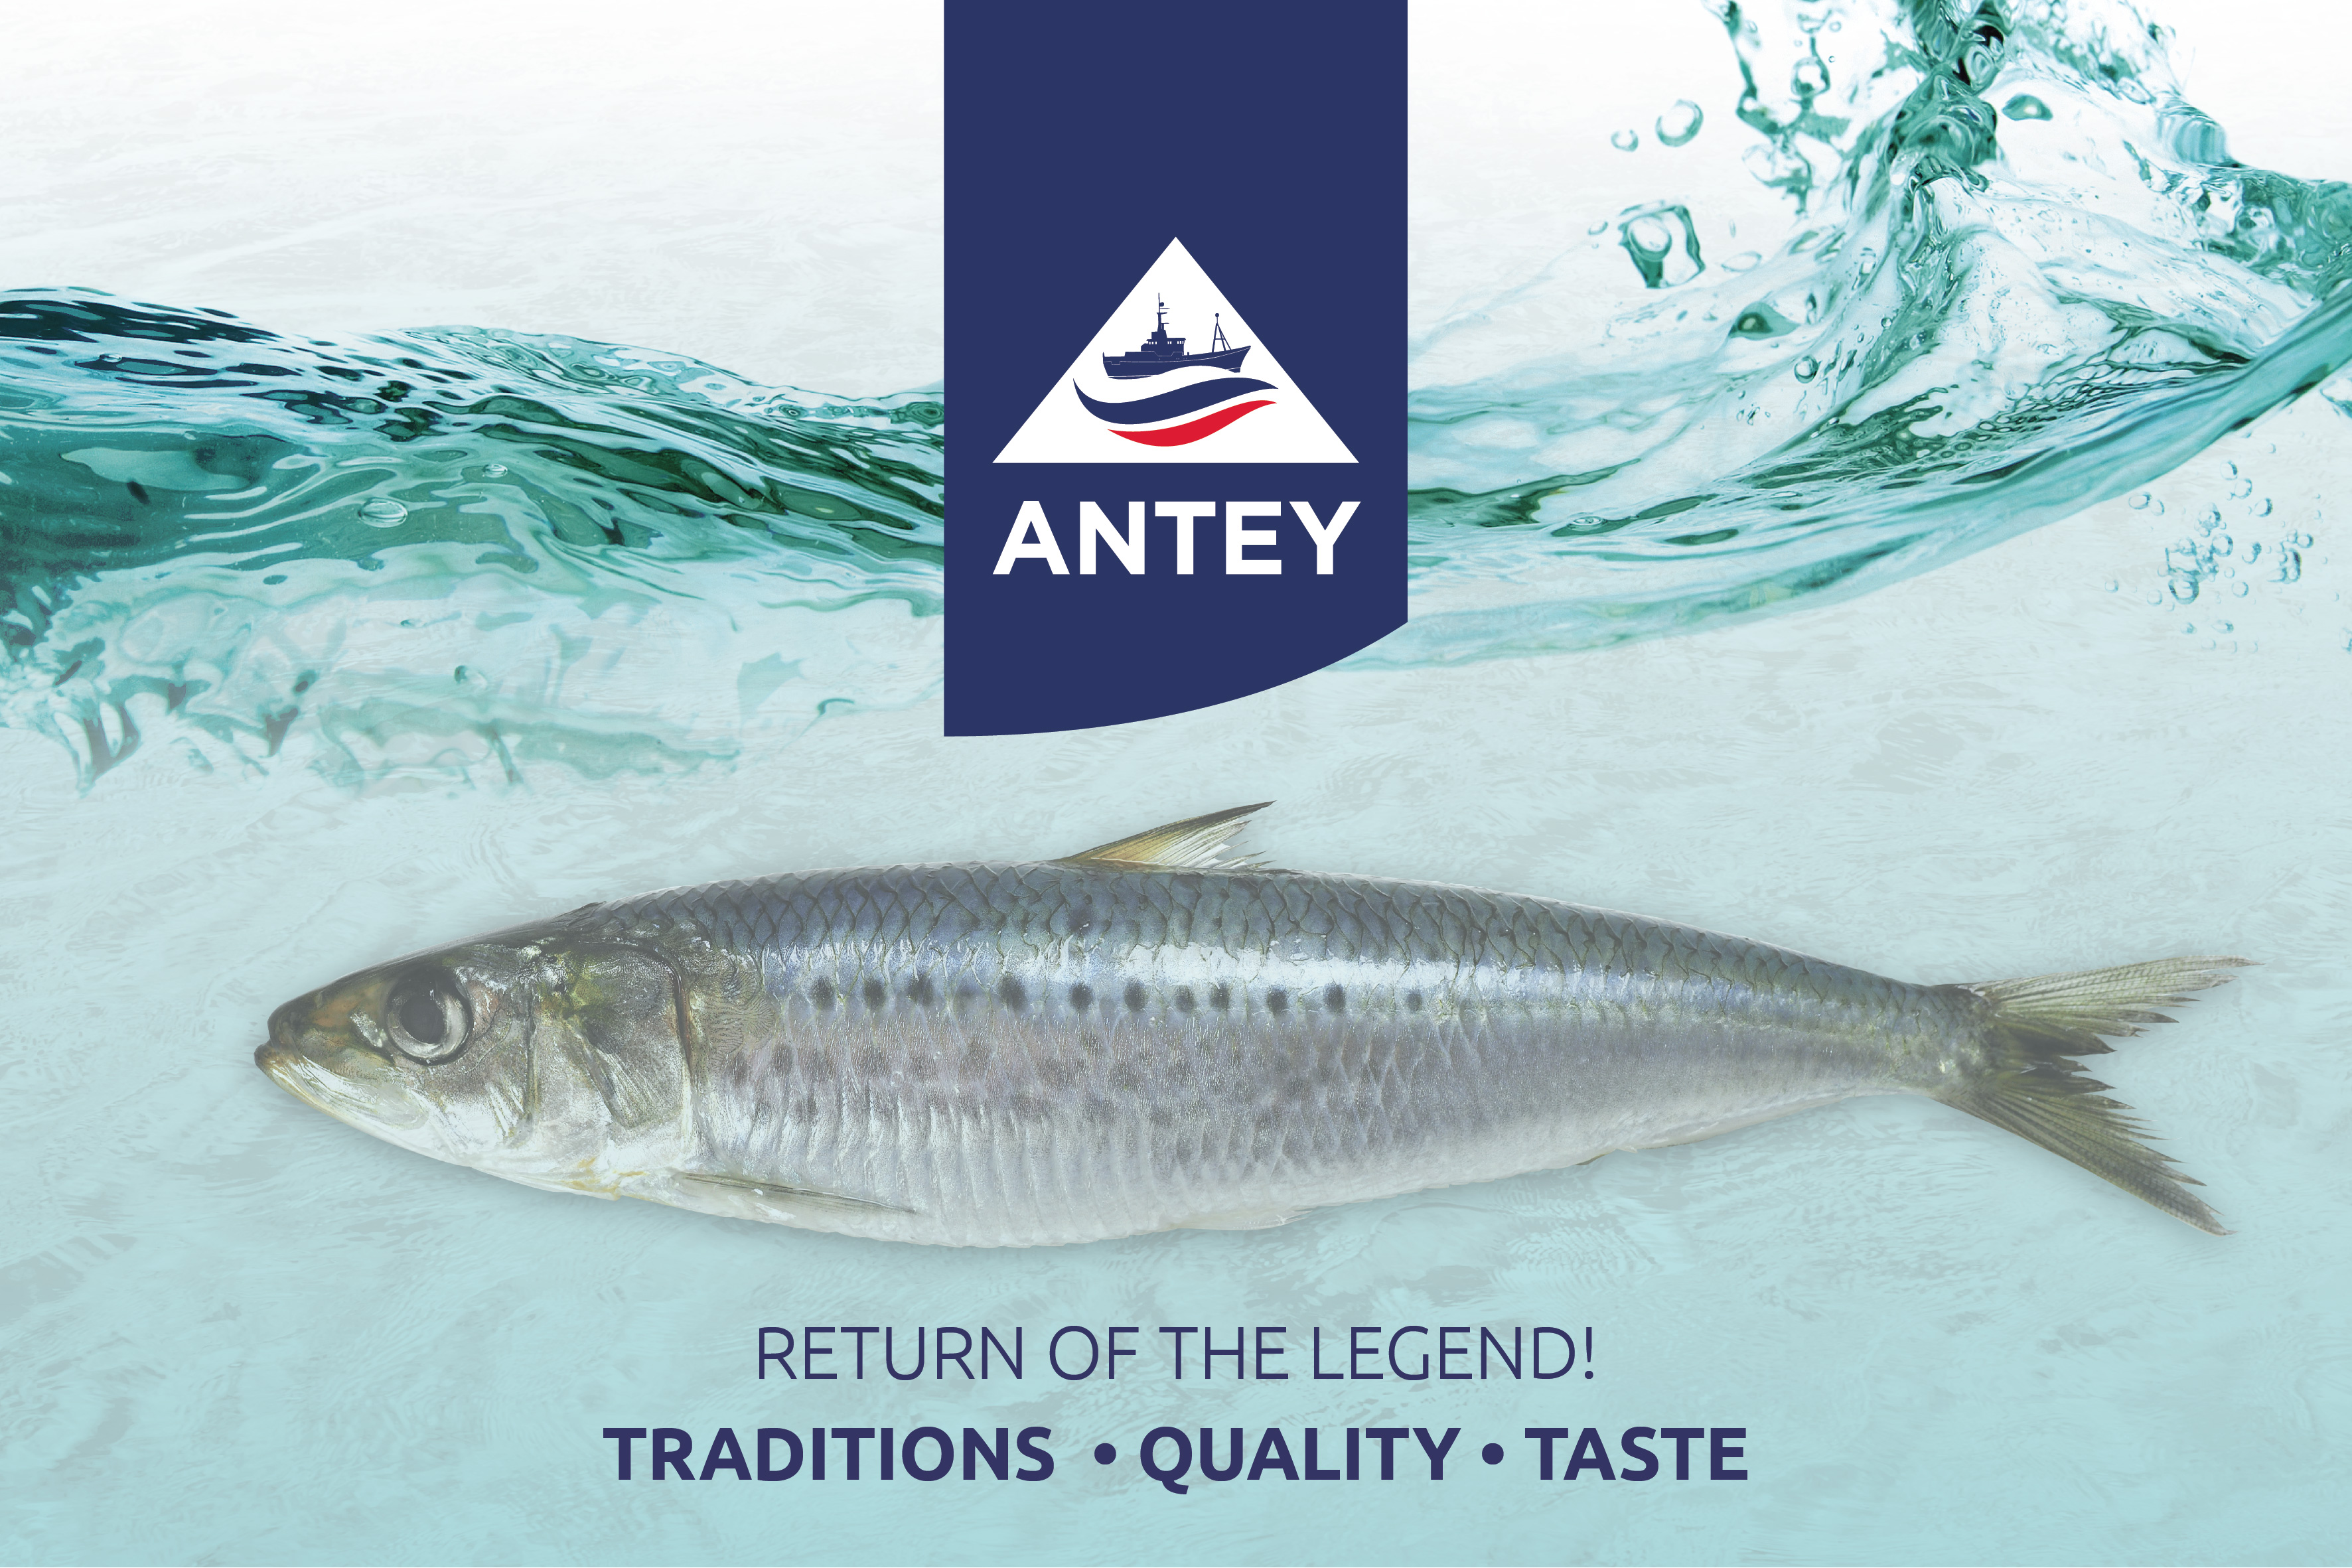 Antey is the Registration Area Partner of Seafood Expo Russia 2021